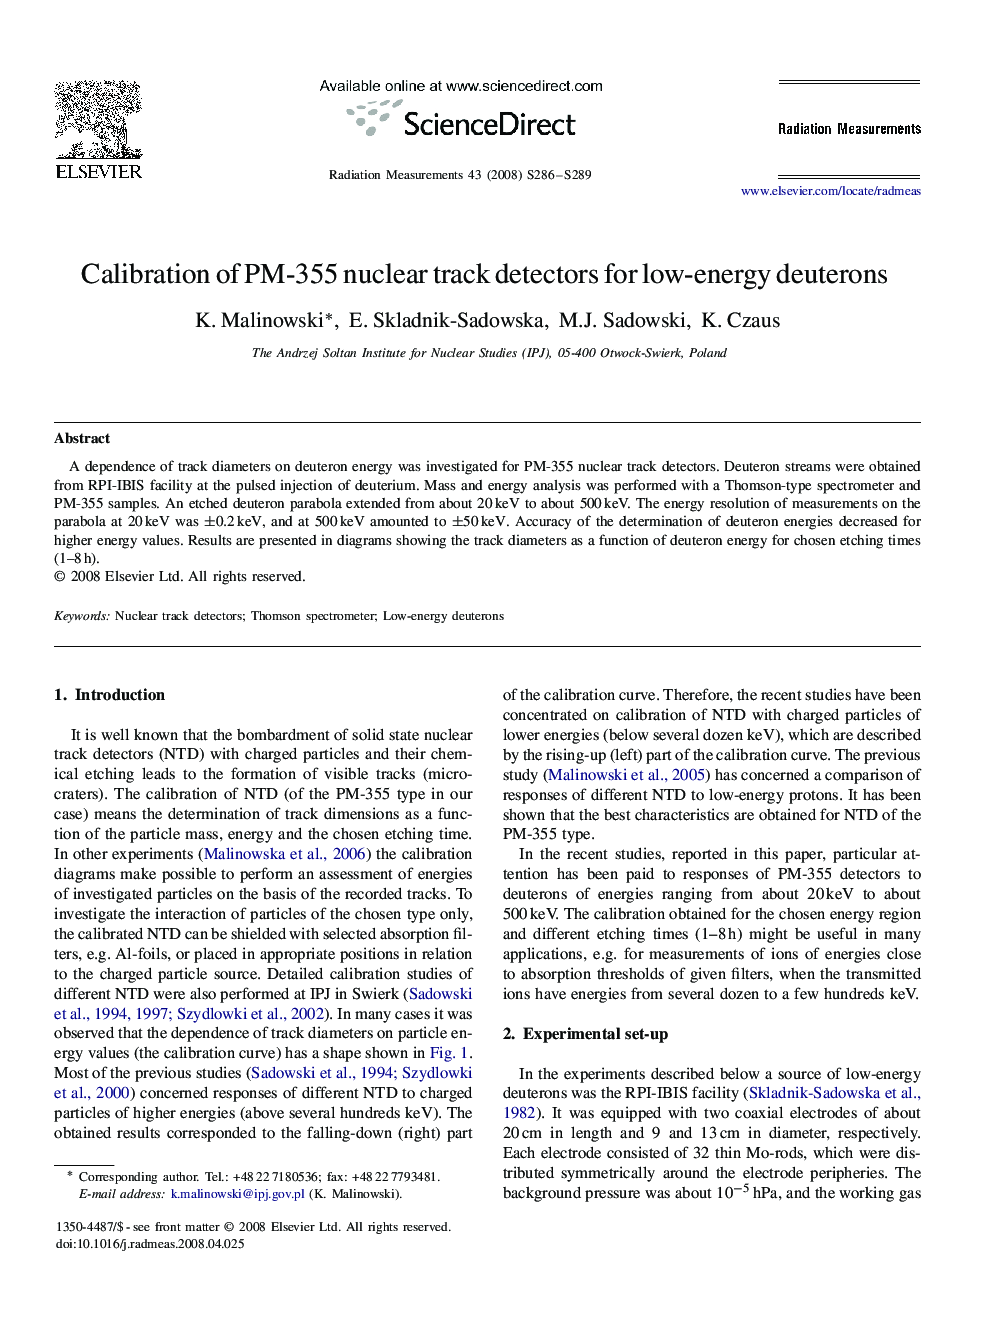 Calibration of PM-355 nuclear track detectors for low-energy deuterons